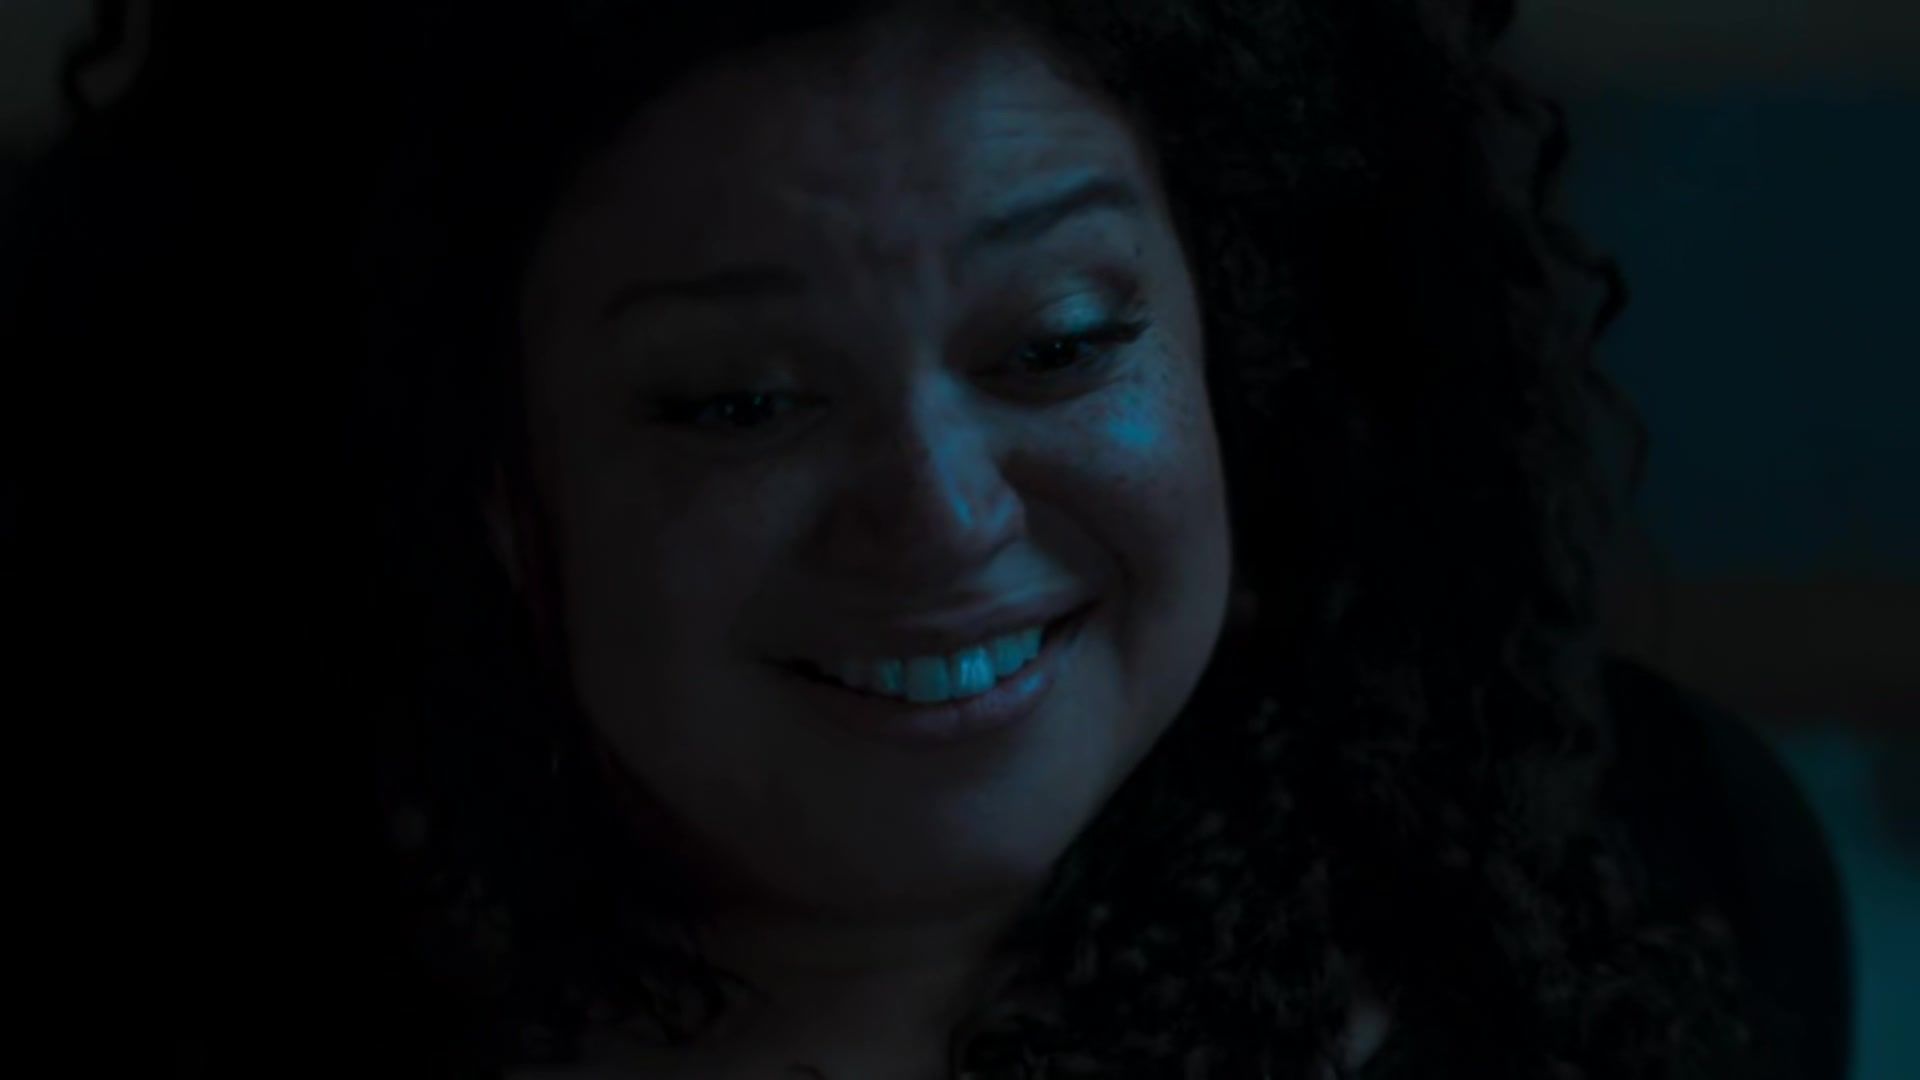 Dicksucking Nude Michelle Buteau - The First Wives Club s01e01 (2019) Jerk Off